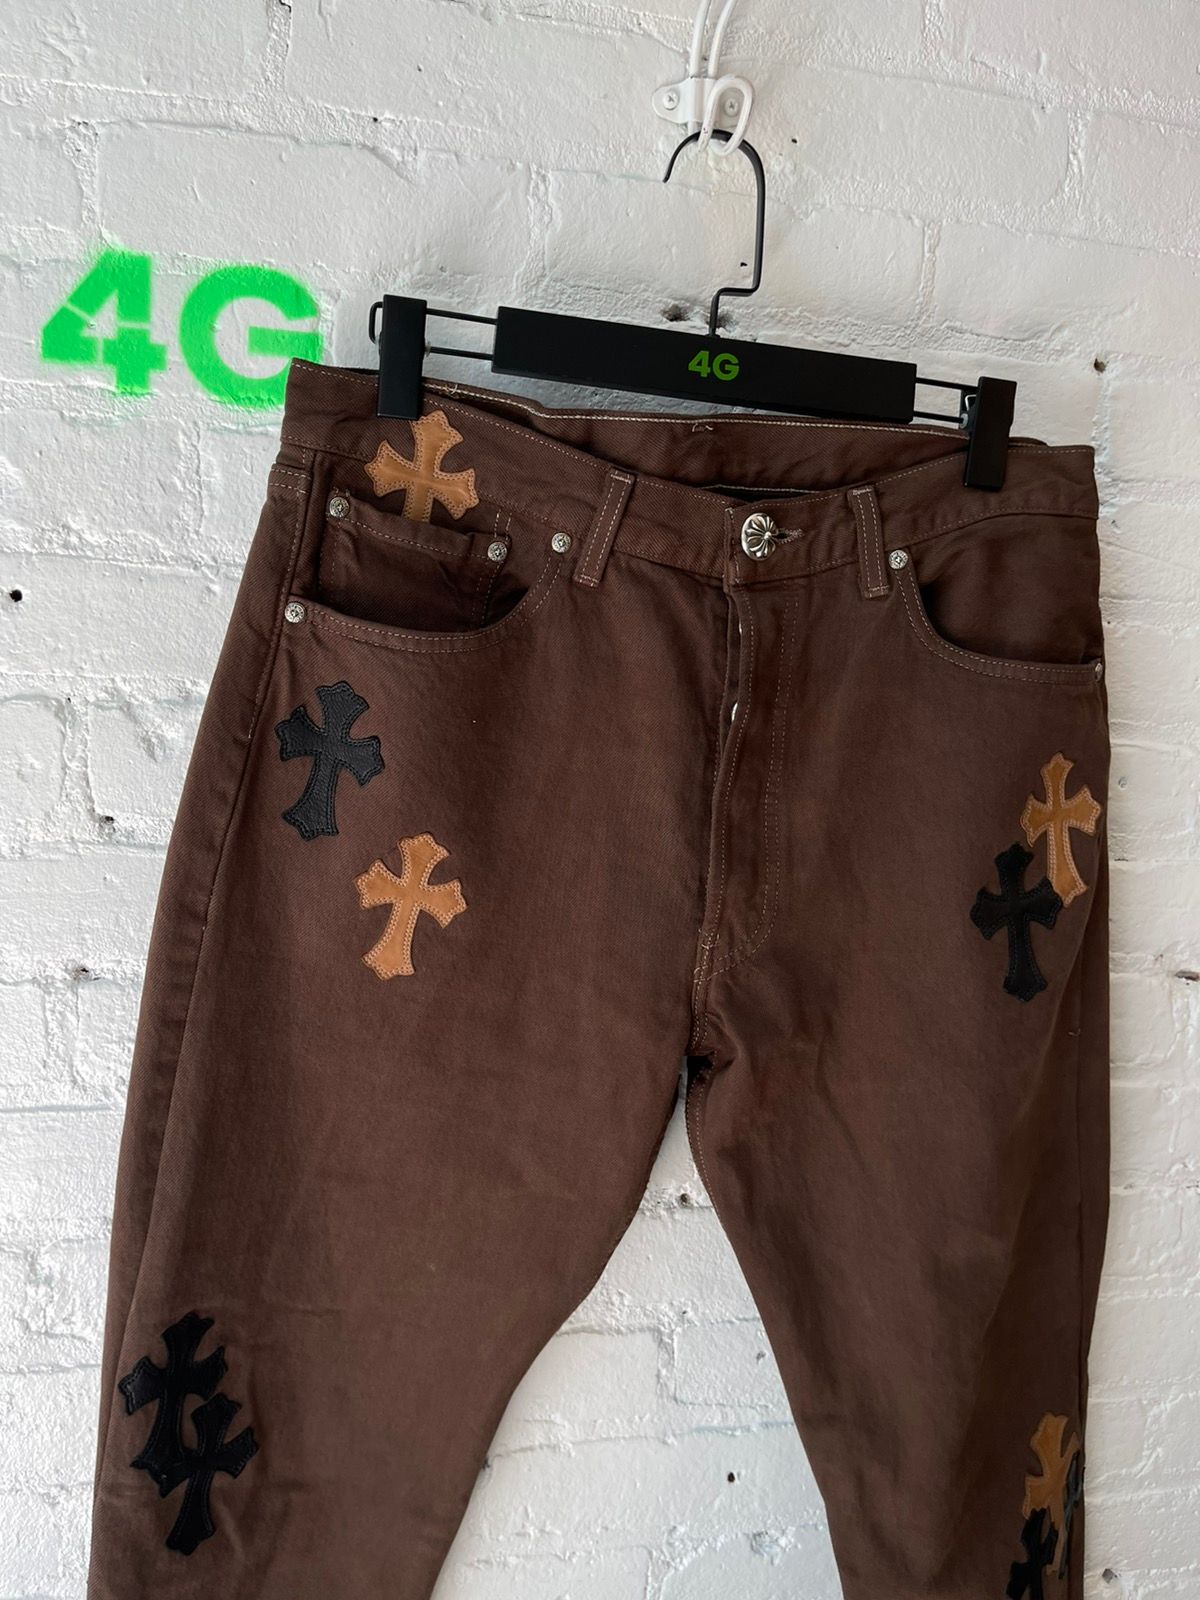 Chrome Hearts OFFSET Personal Levi Cross Patch Jeans Brown